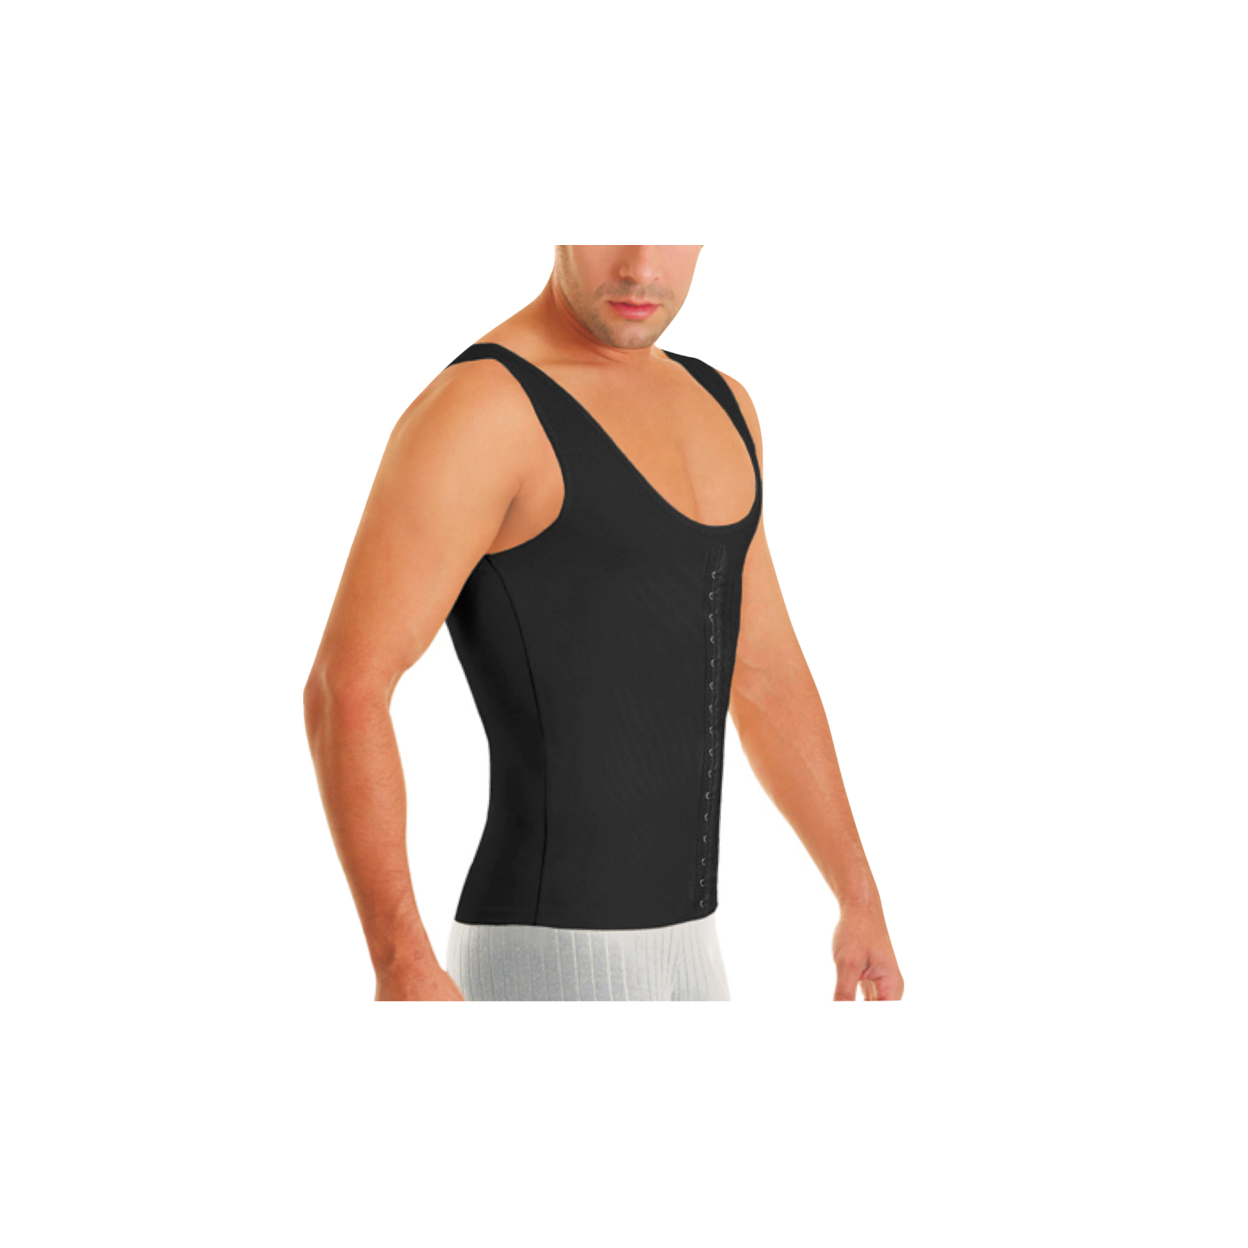 Men Waistcoat High-Compression Body Shaper In Regular And Plus Sizes - Nude, 2X